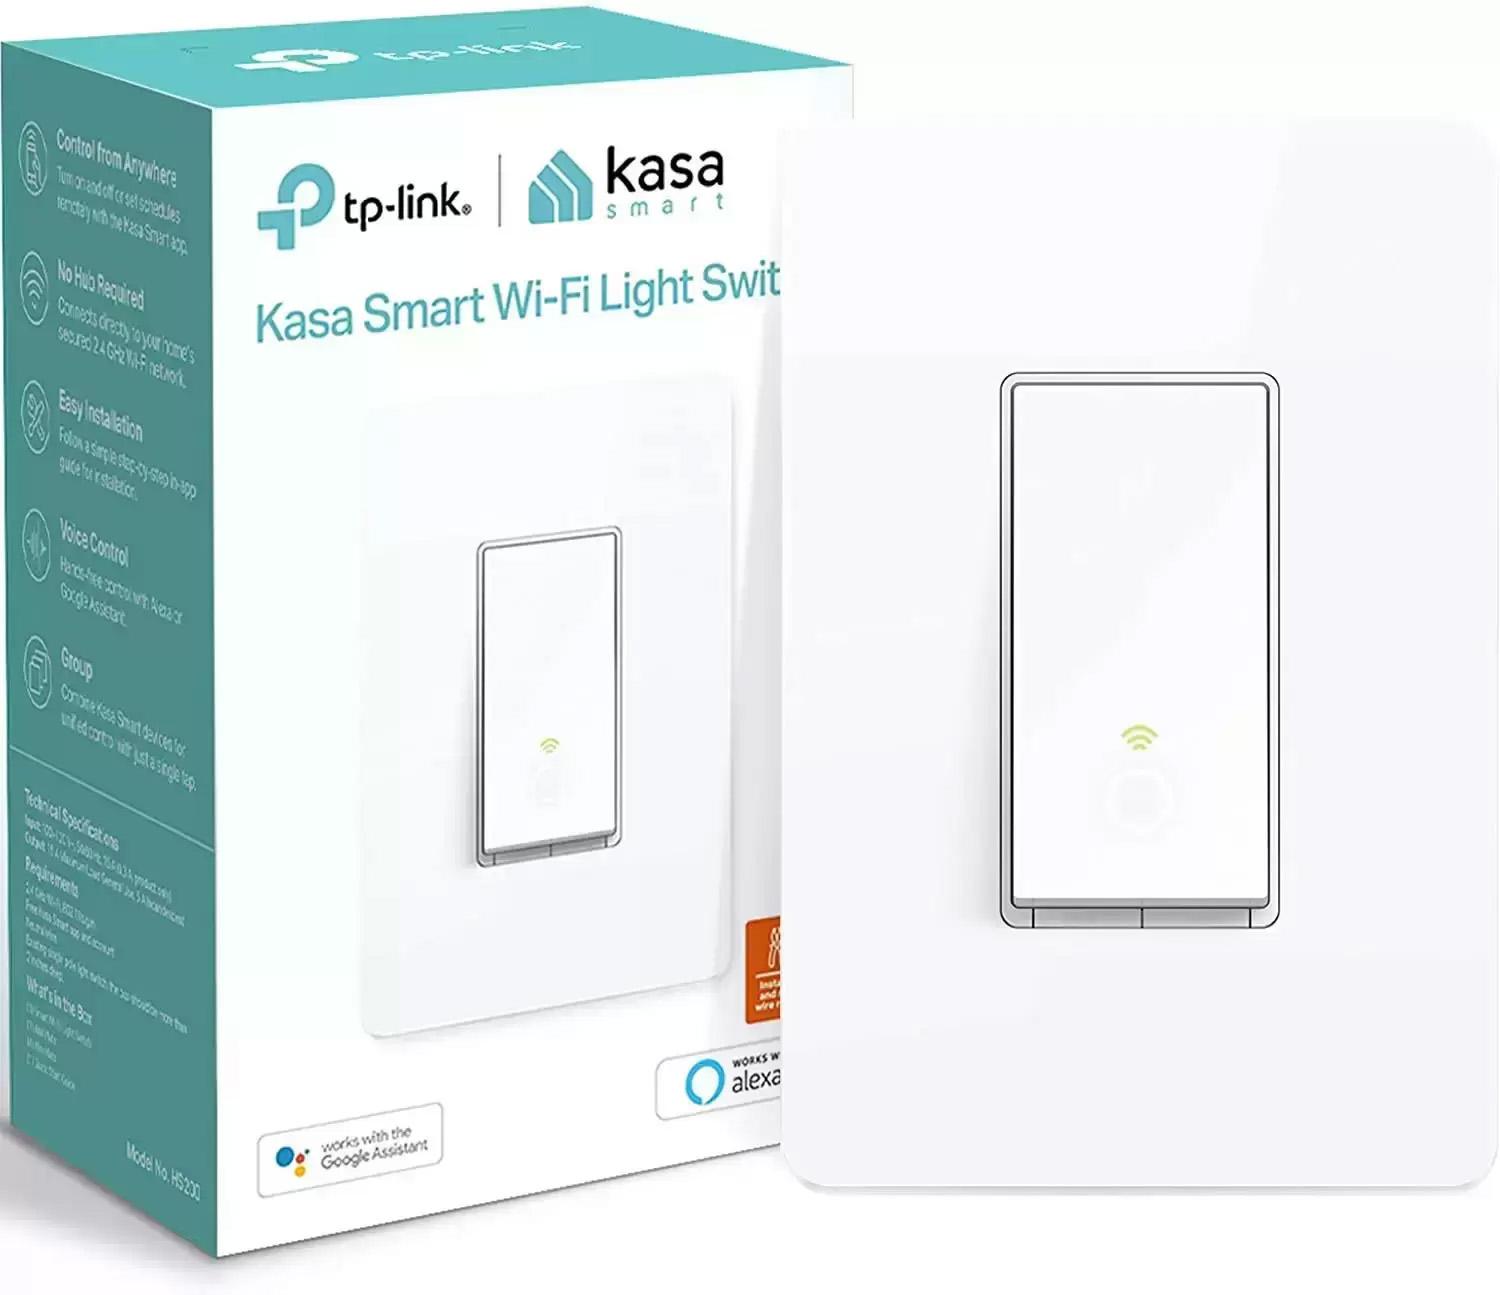 TP-Link HS200 Smart WiFi Light Switch for $13.99